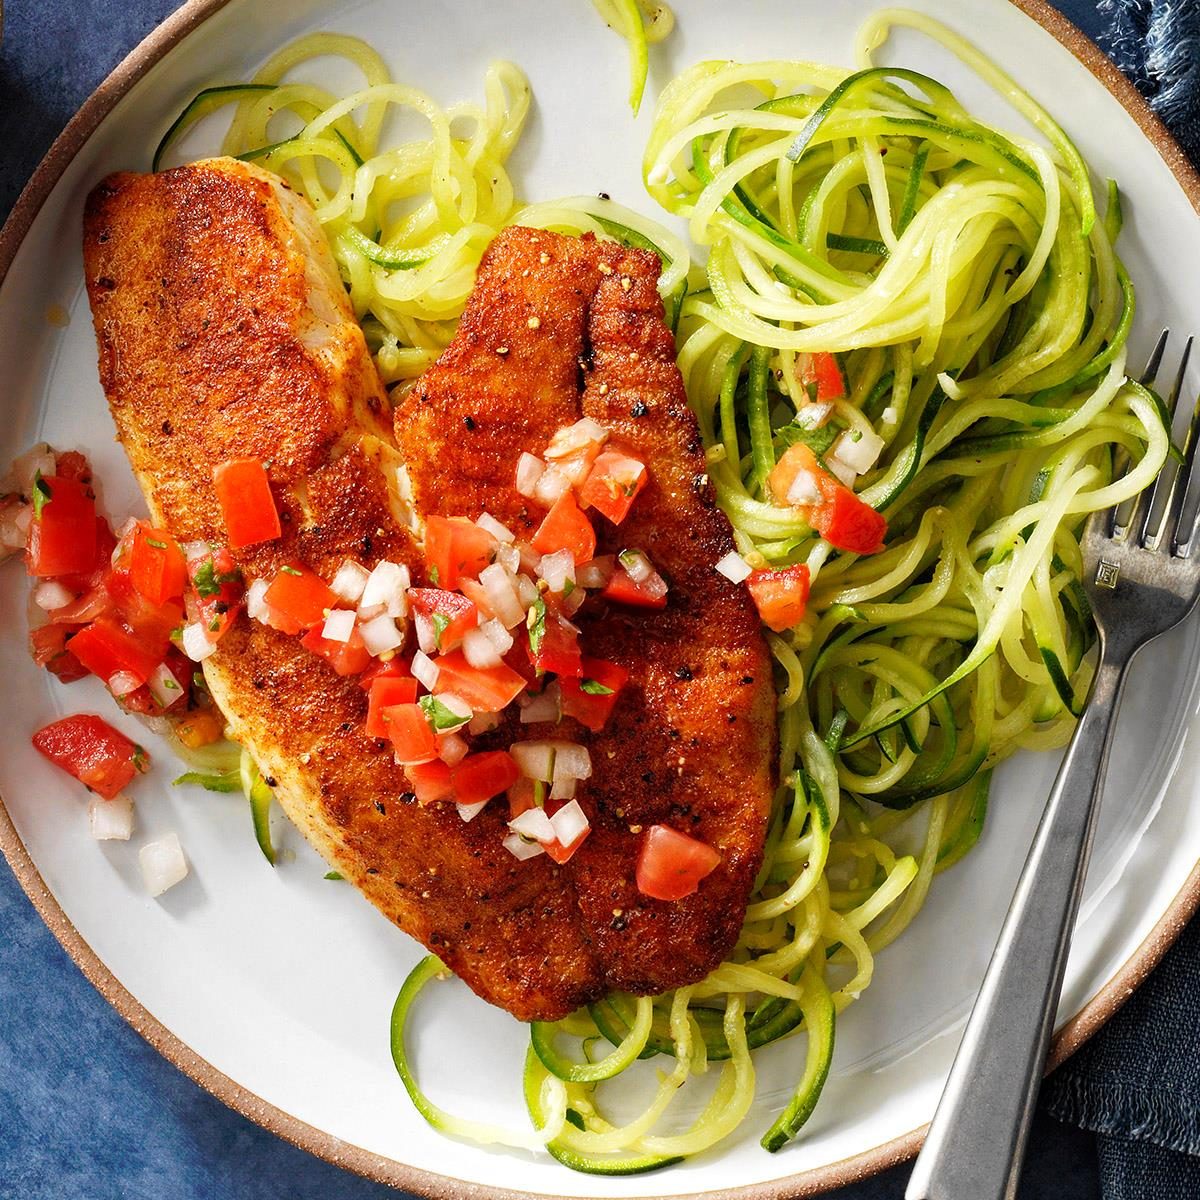 Blackened Tilapia With Zucchini Noodles Exps Toham23 200349 P2 Md 11 04 7b